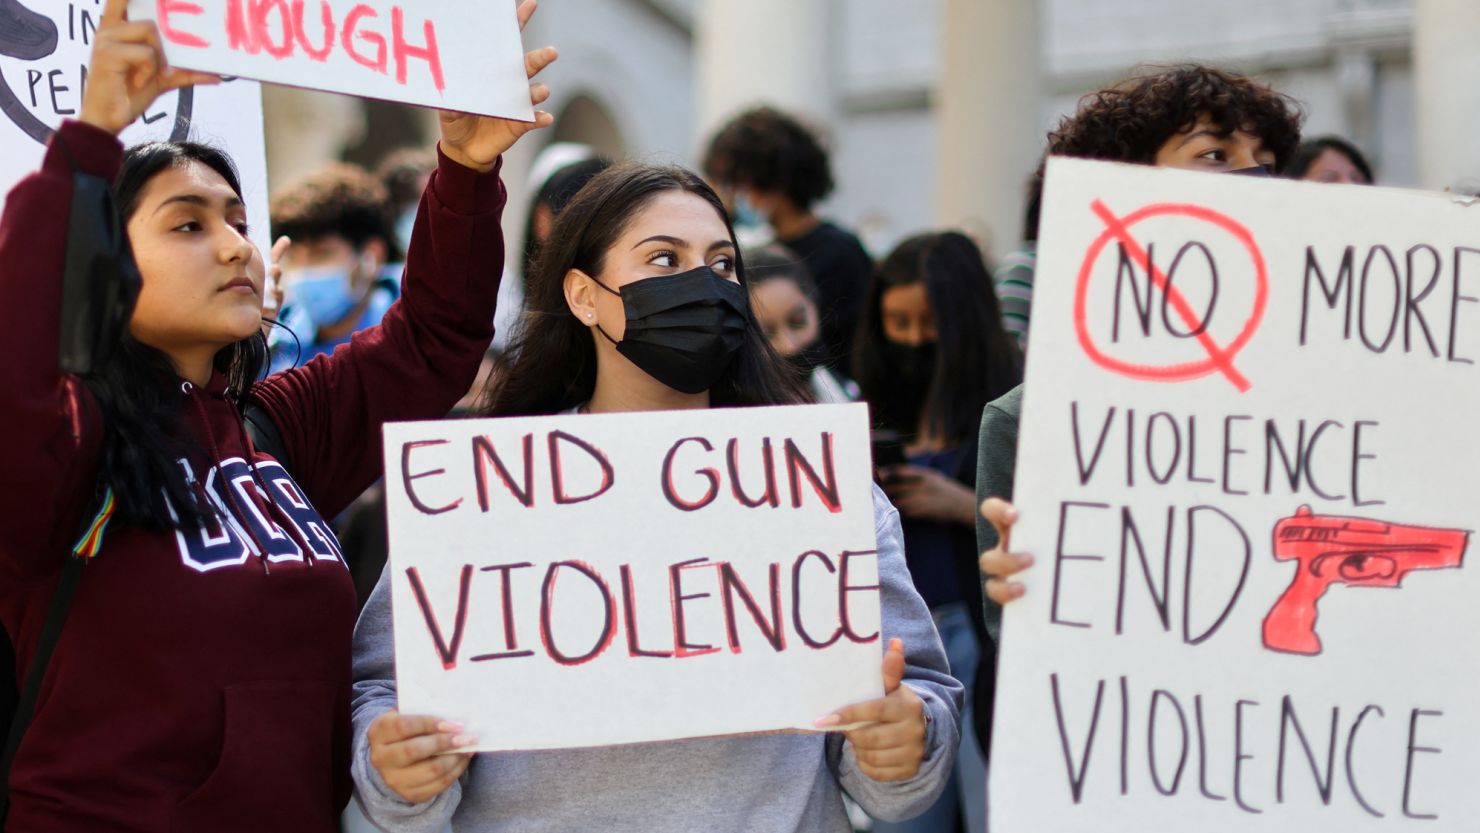 FILE PHOTO: Students from Miguel Contreras Learning Center high school in Los Angeles demonstrate in front of City Hall after walking out of school to protest U.S. gun violence, California, U.S., May 31, 2022. REUTERS/Lucy Nicholson/File Photo